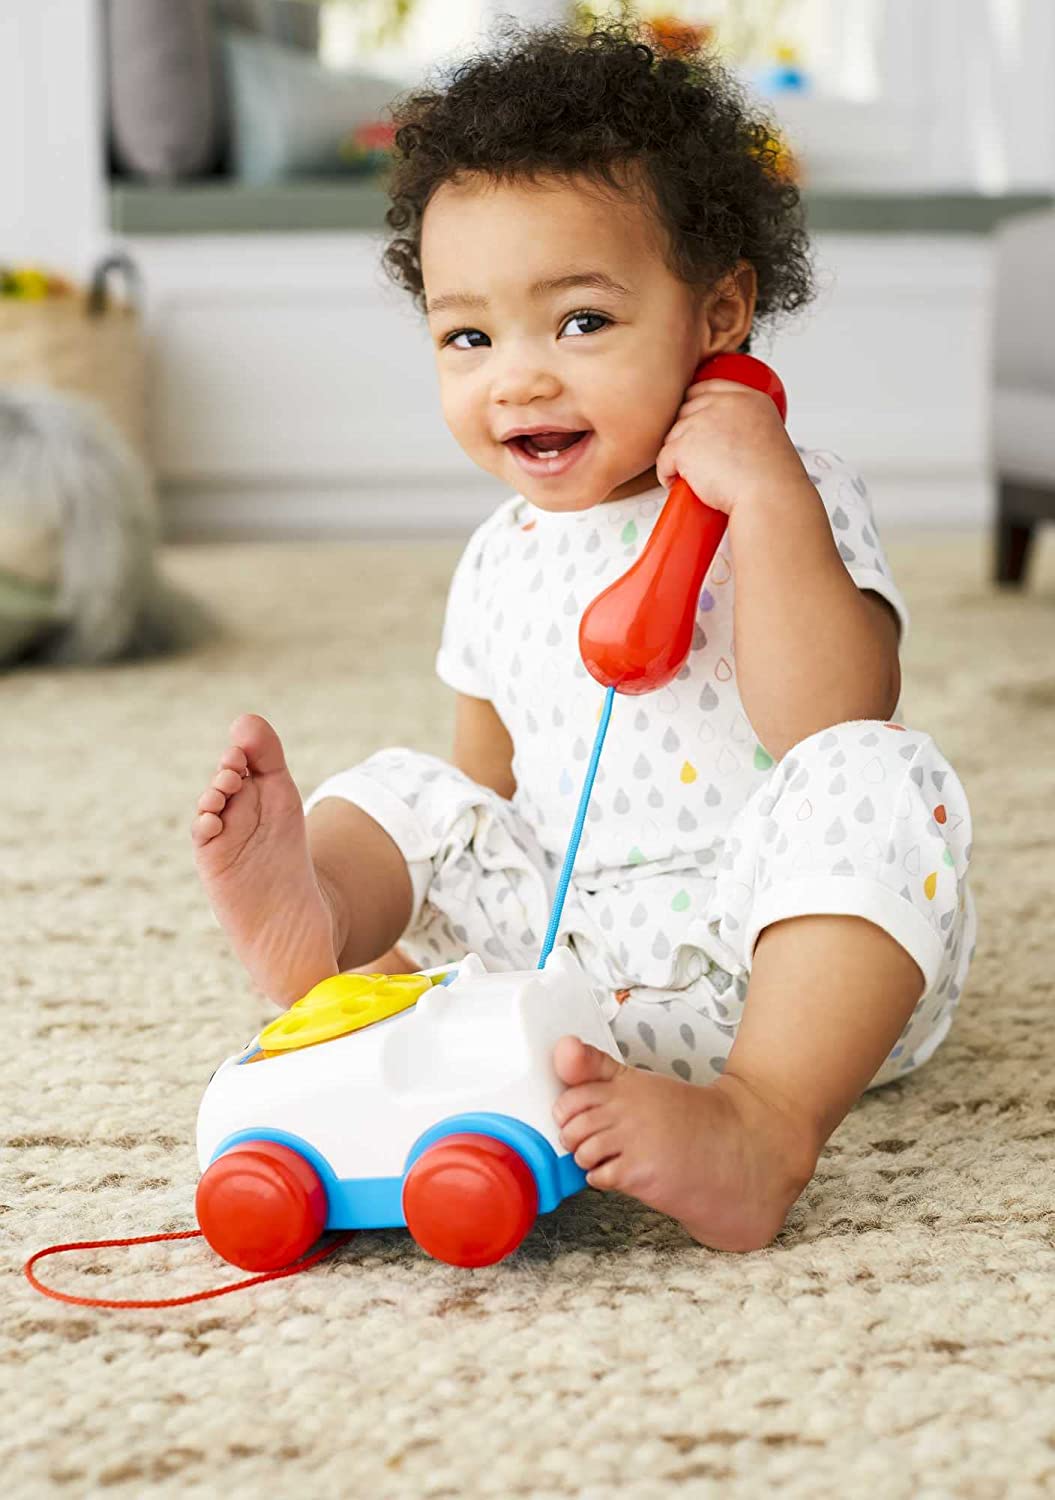 Chatter Telephone by Fisher Price #FGW66